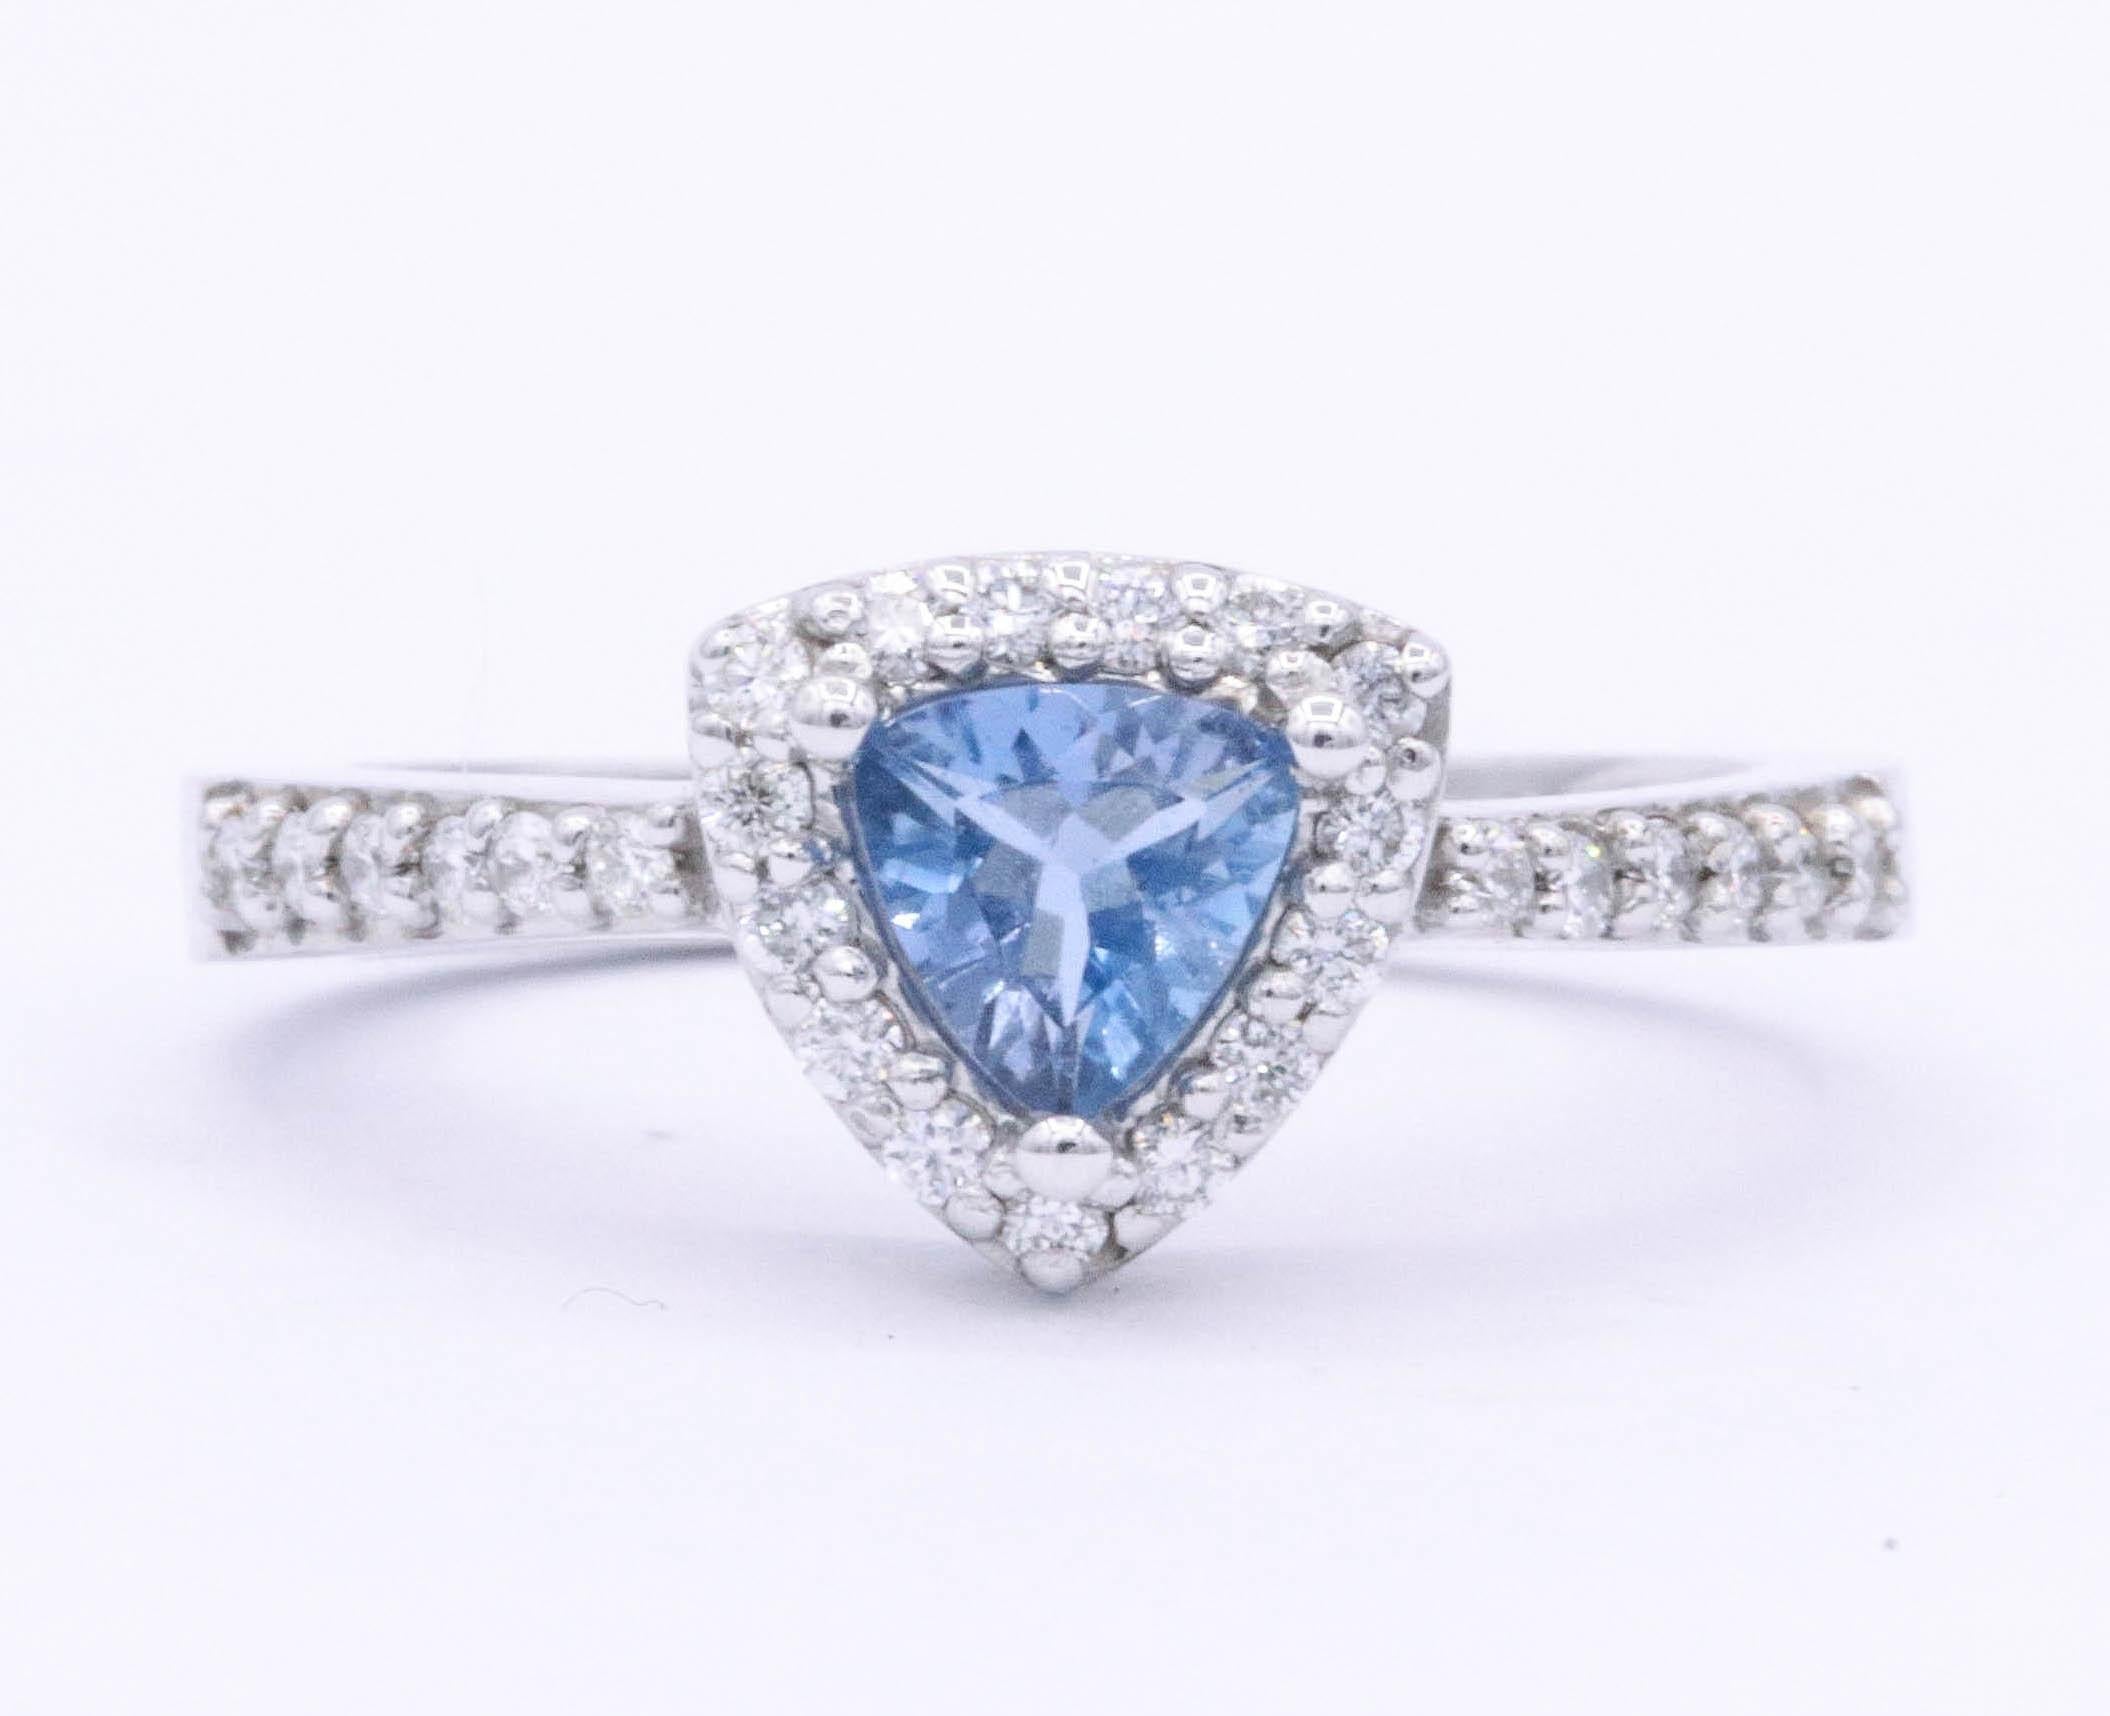 14K White gold ring featuring one trillion cut Aquamarine weighing 0.40 carats, 5 mm, flanked with round brilliants weighing 0.25 carats. Color G-H Clarity SI